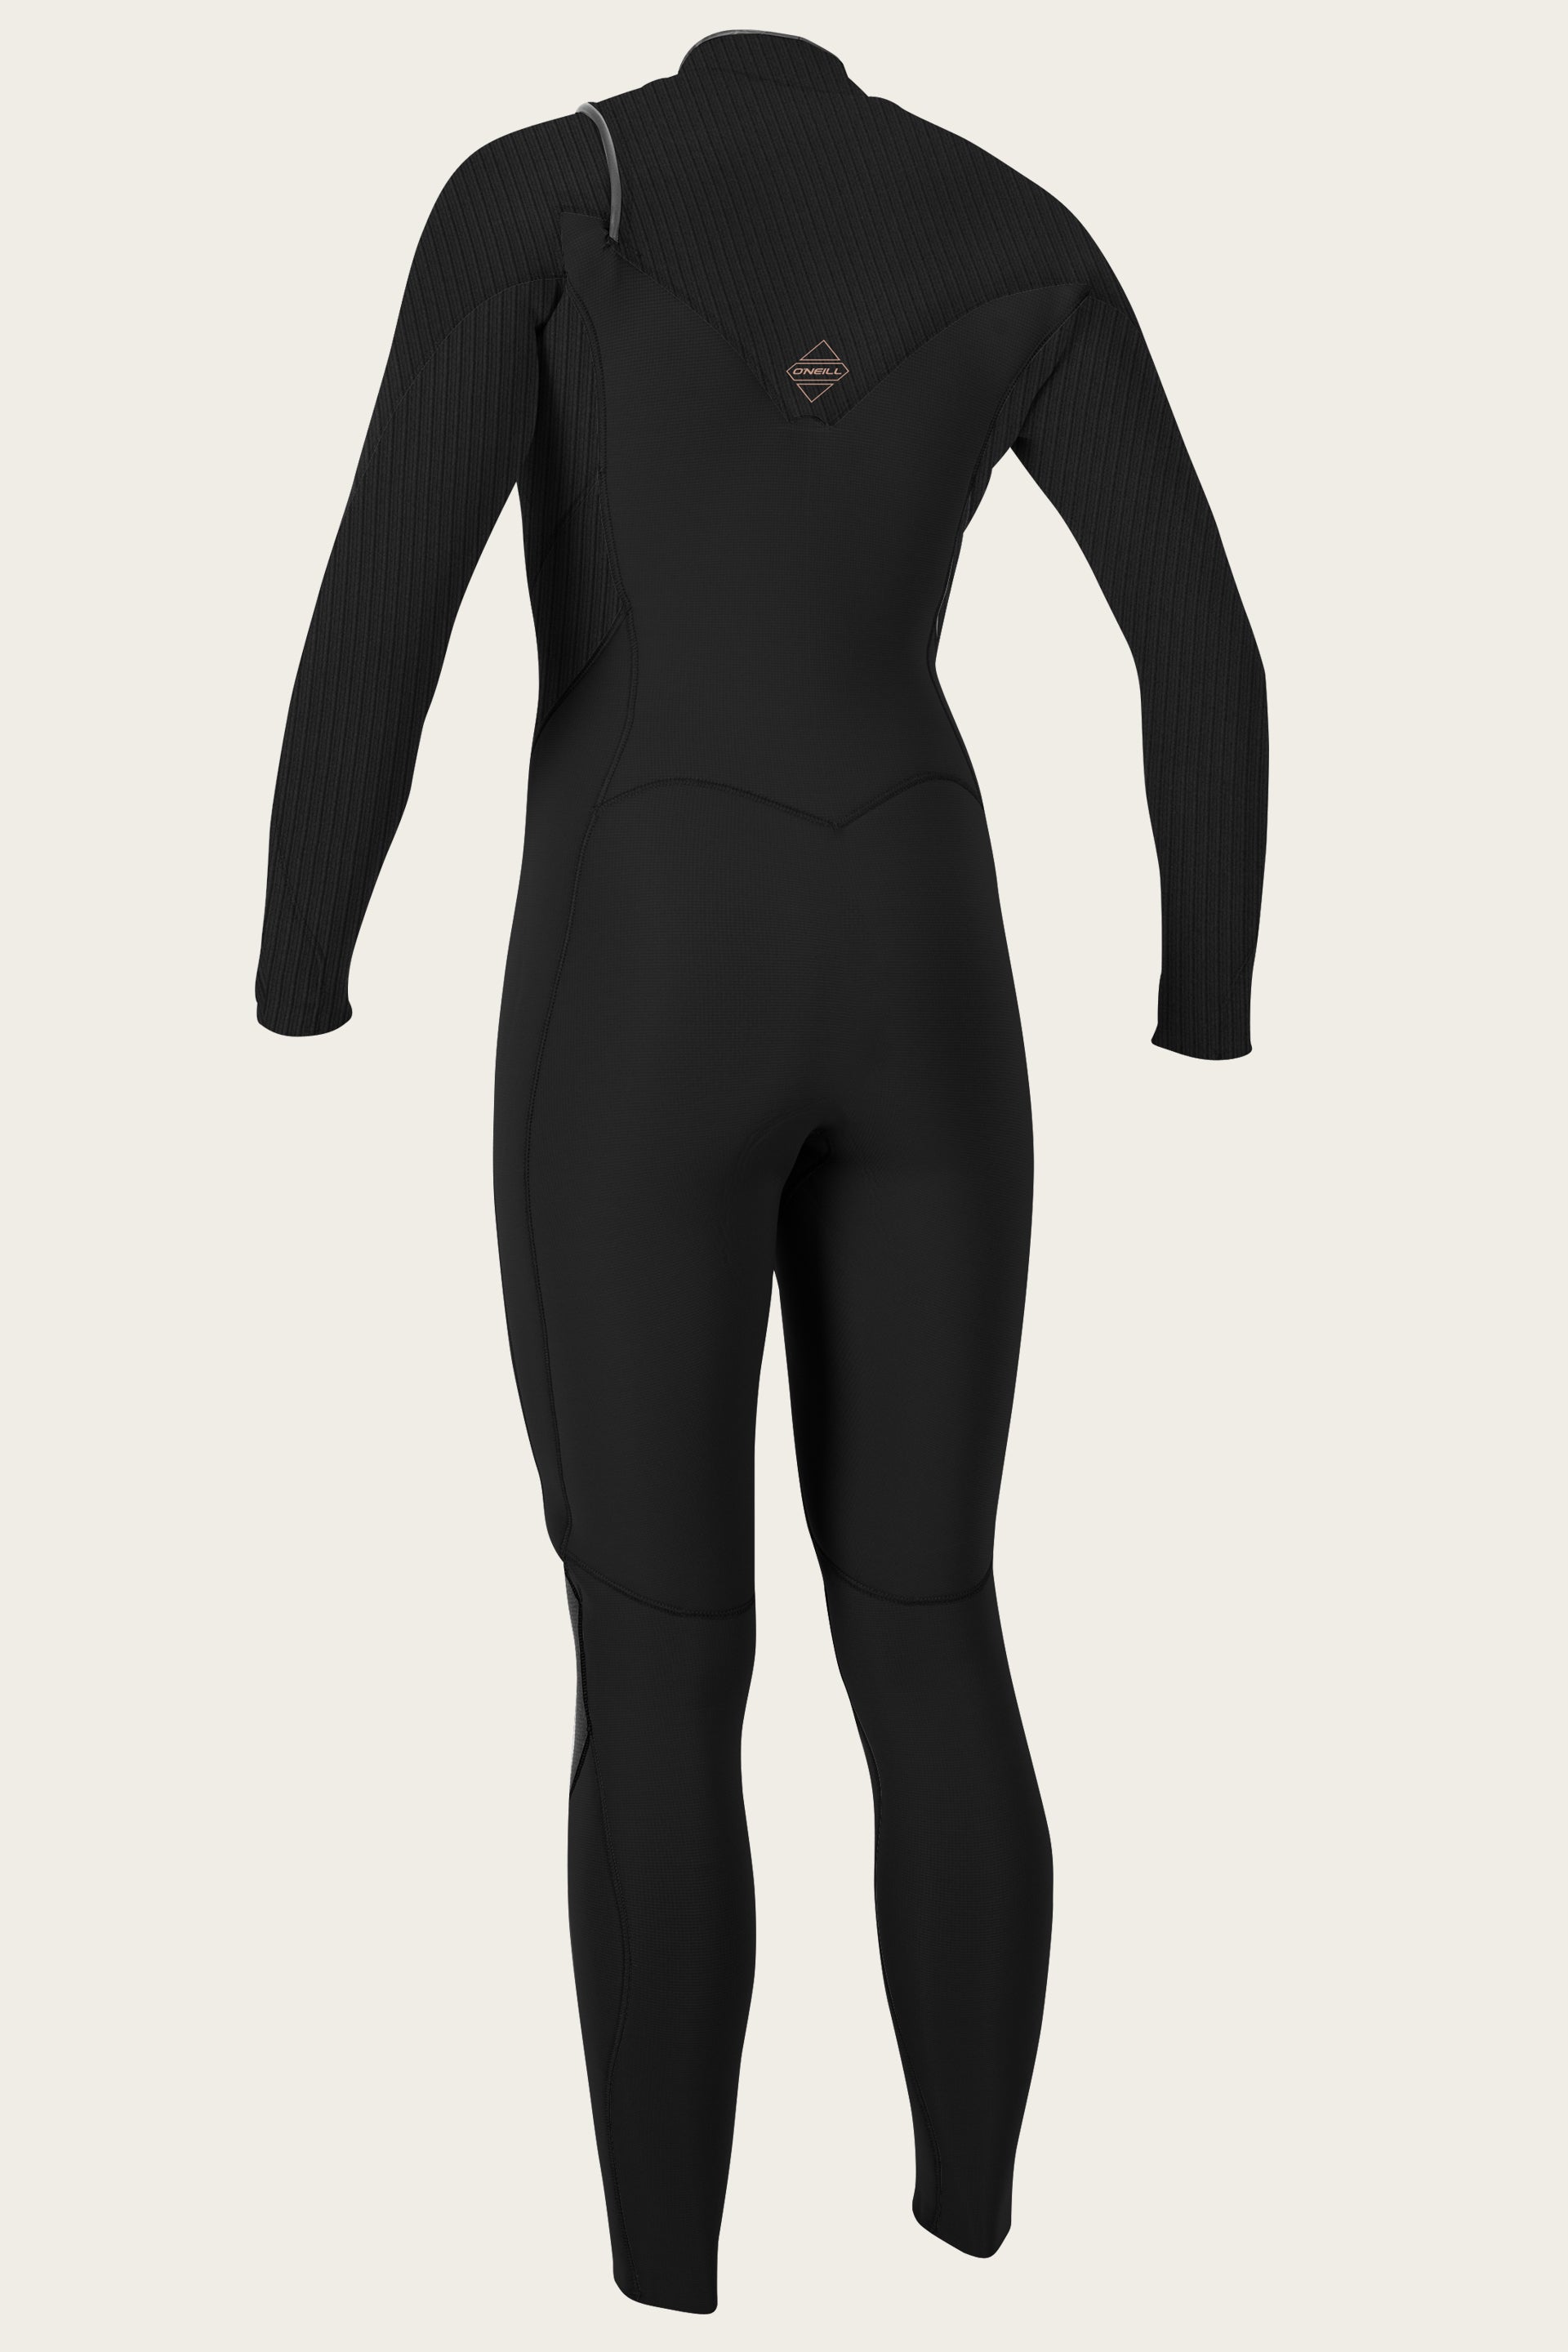 My Hips Don't Lie: The Problem with Women's Wetsuits